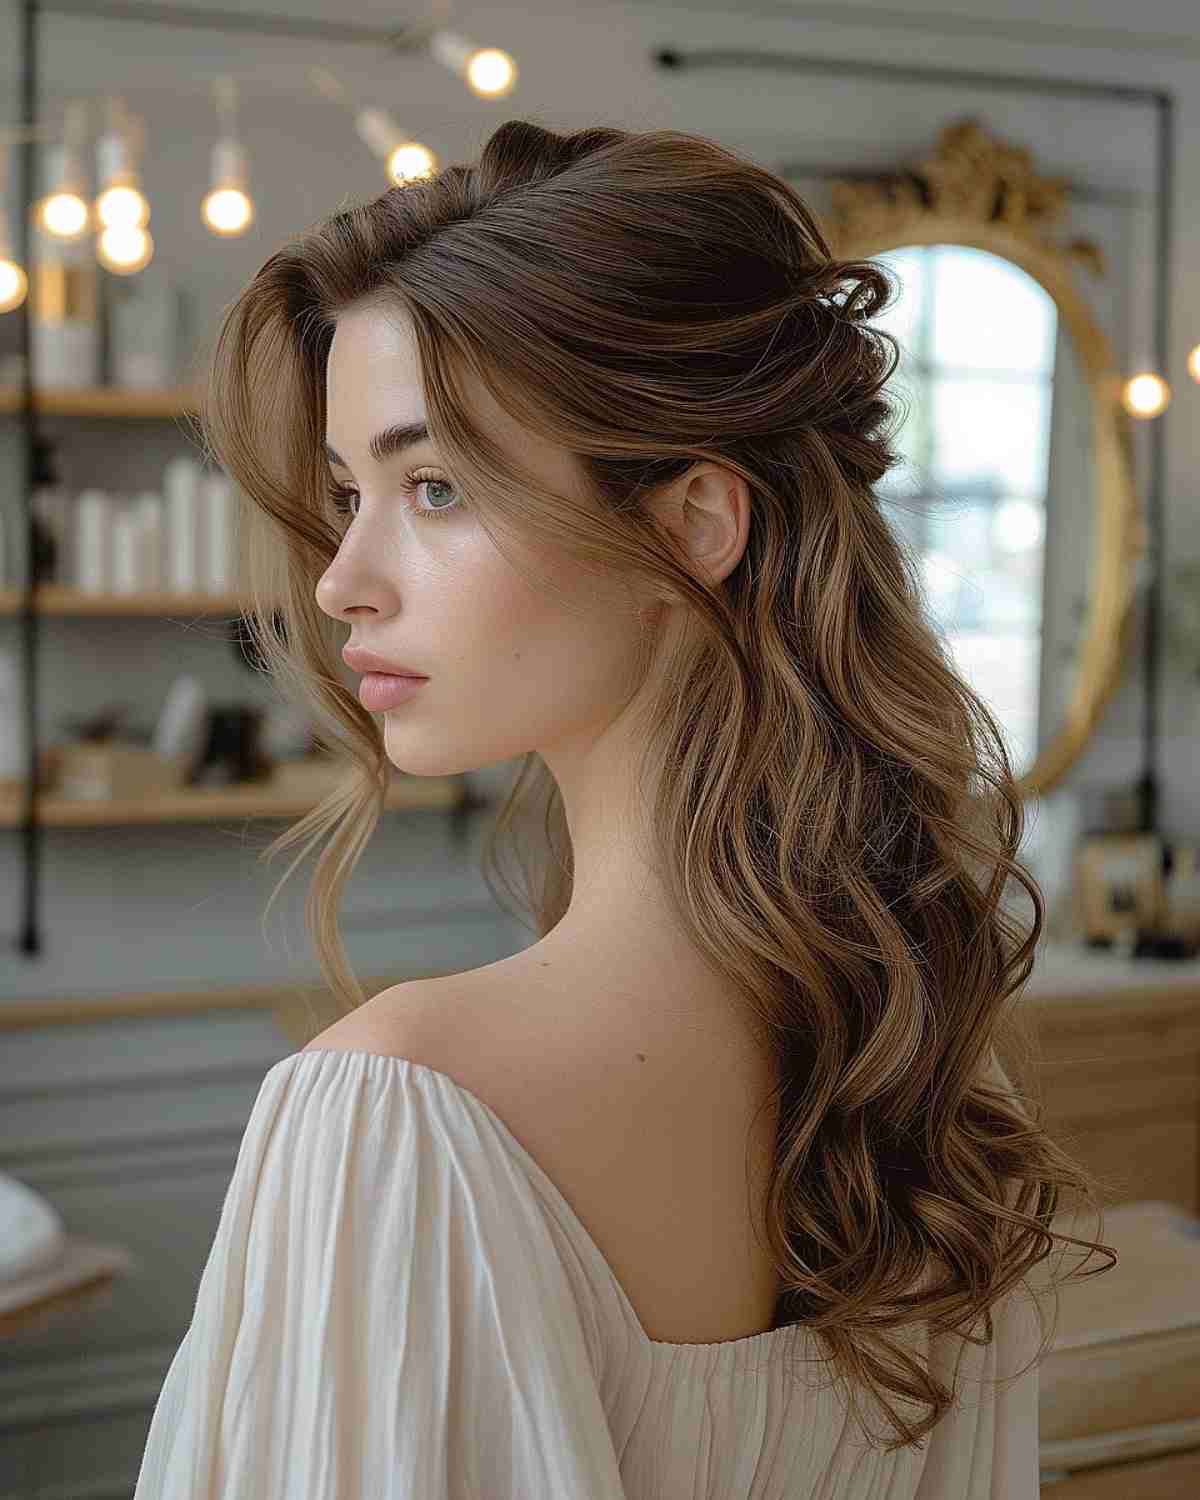 Ethereal Half-Up Half-Down with Soft Curls